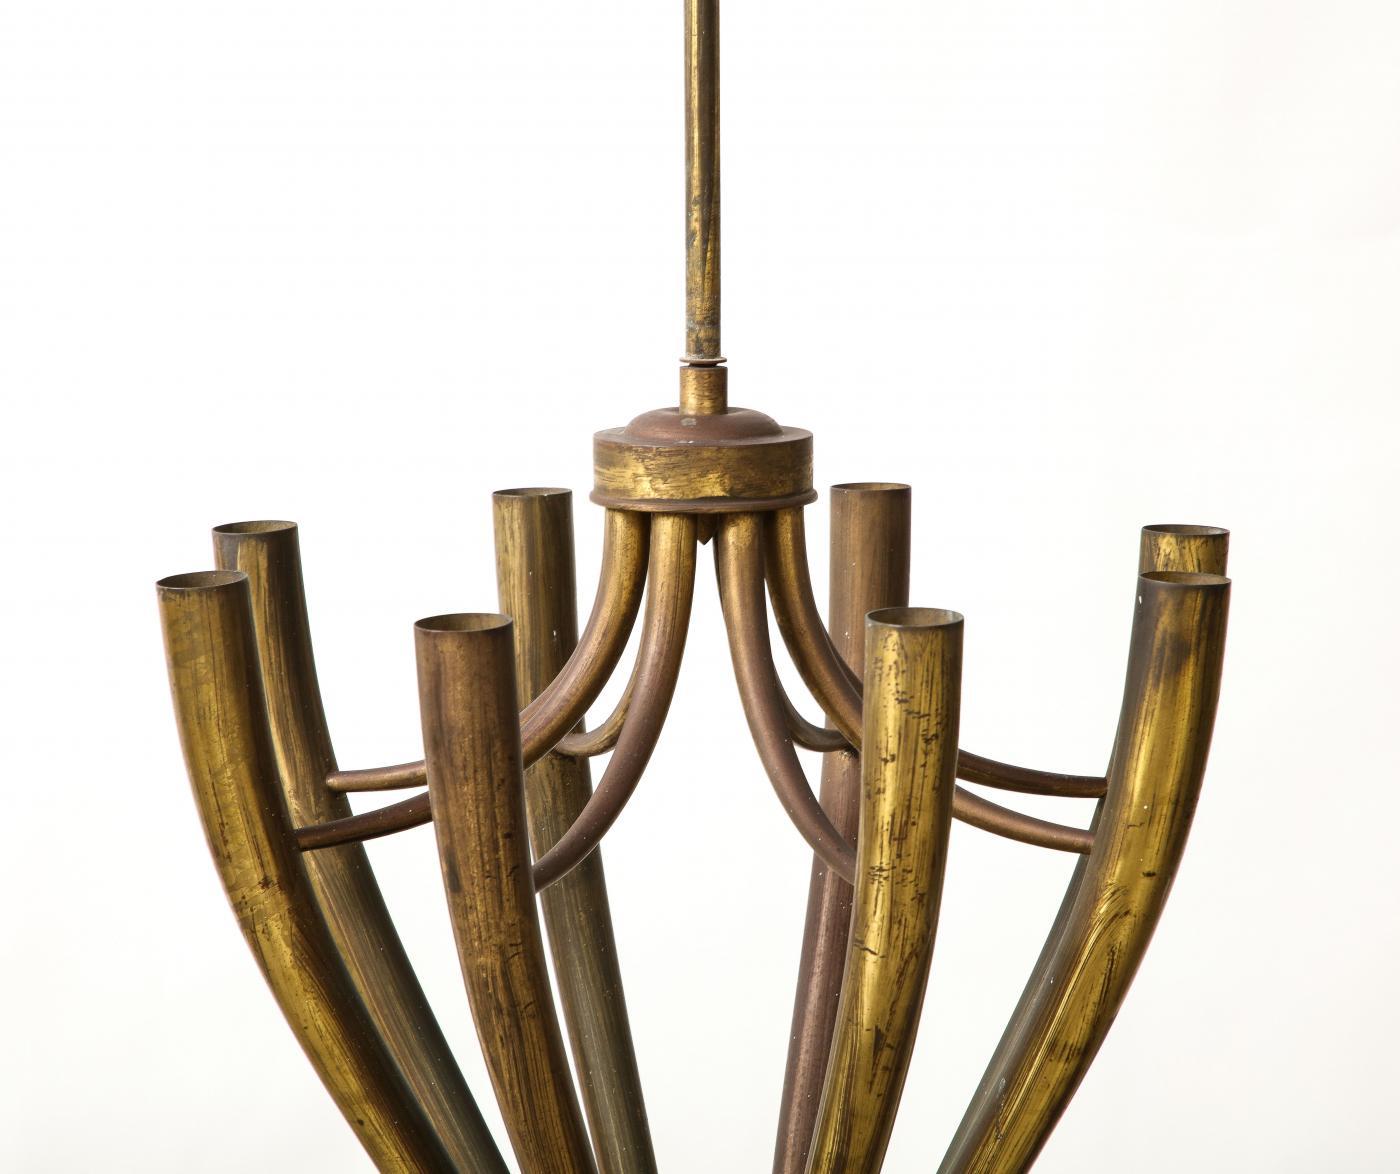 Eight-Arm Patinated Brass Chandelier by Guglielmo Ulrich, Italy, c. 1950 For Sale 3